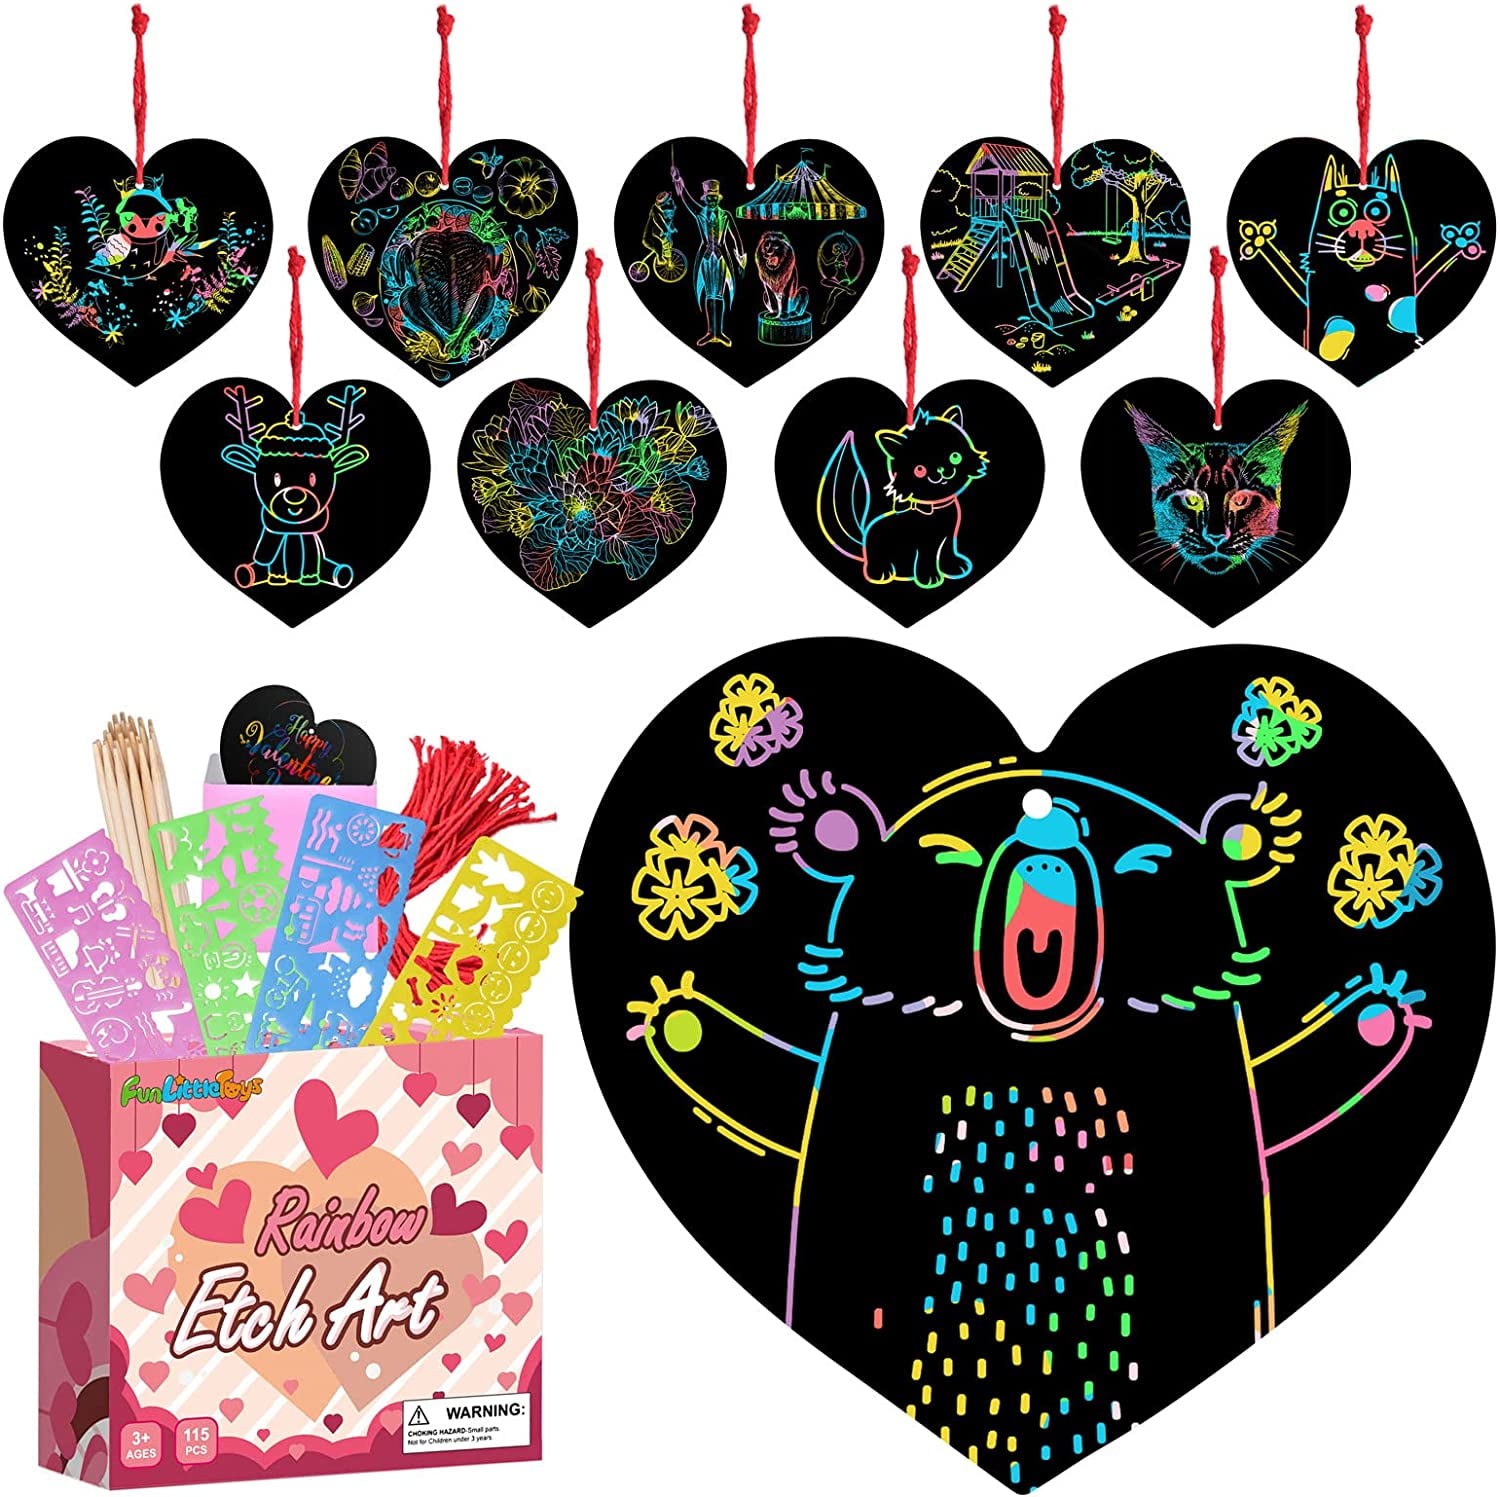 Tuzuaol 28 Pack Valentine Day Crafts for Kids Scratch Off Paper Heart Rainbow Scratch Paper Heart Art Valentine Gifts for School Classroom Exchange